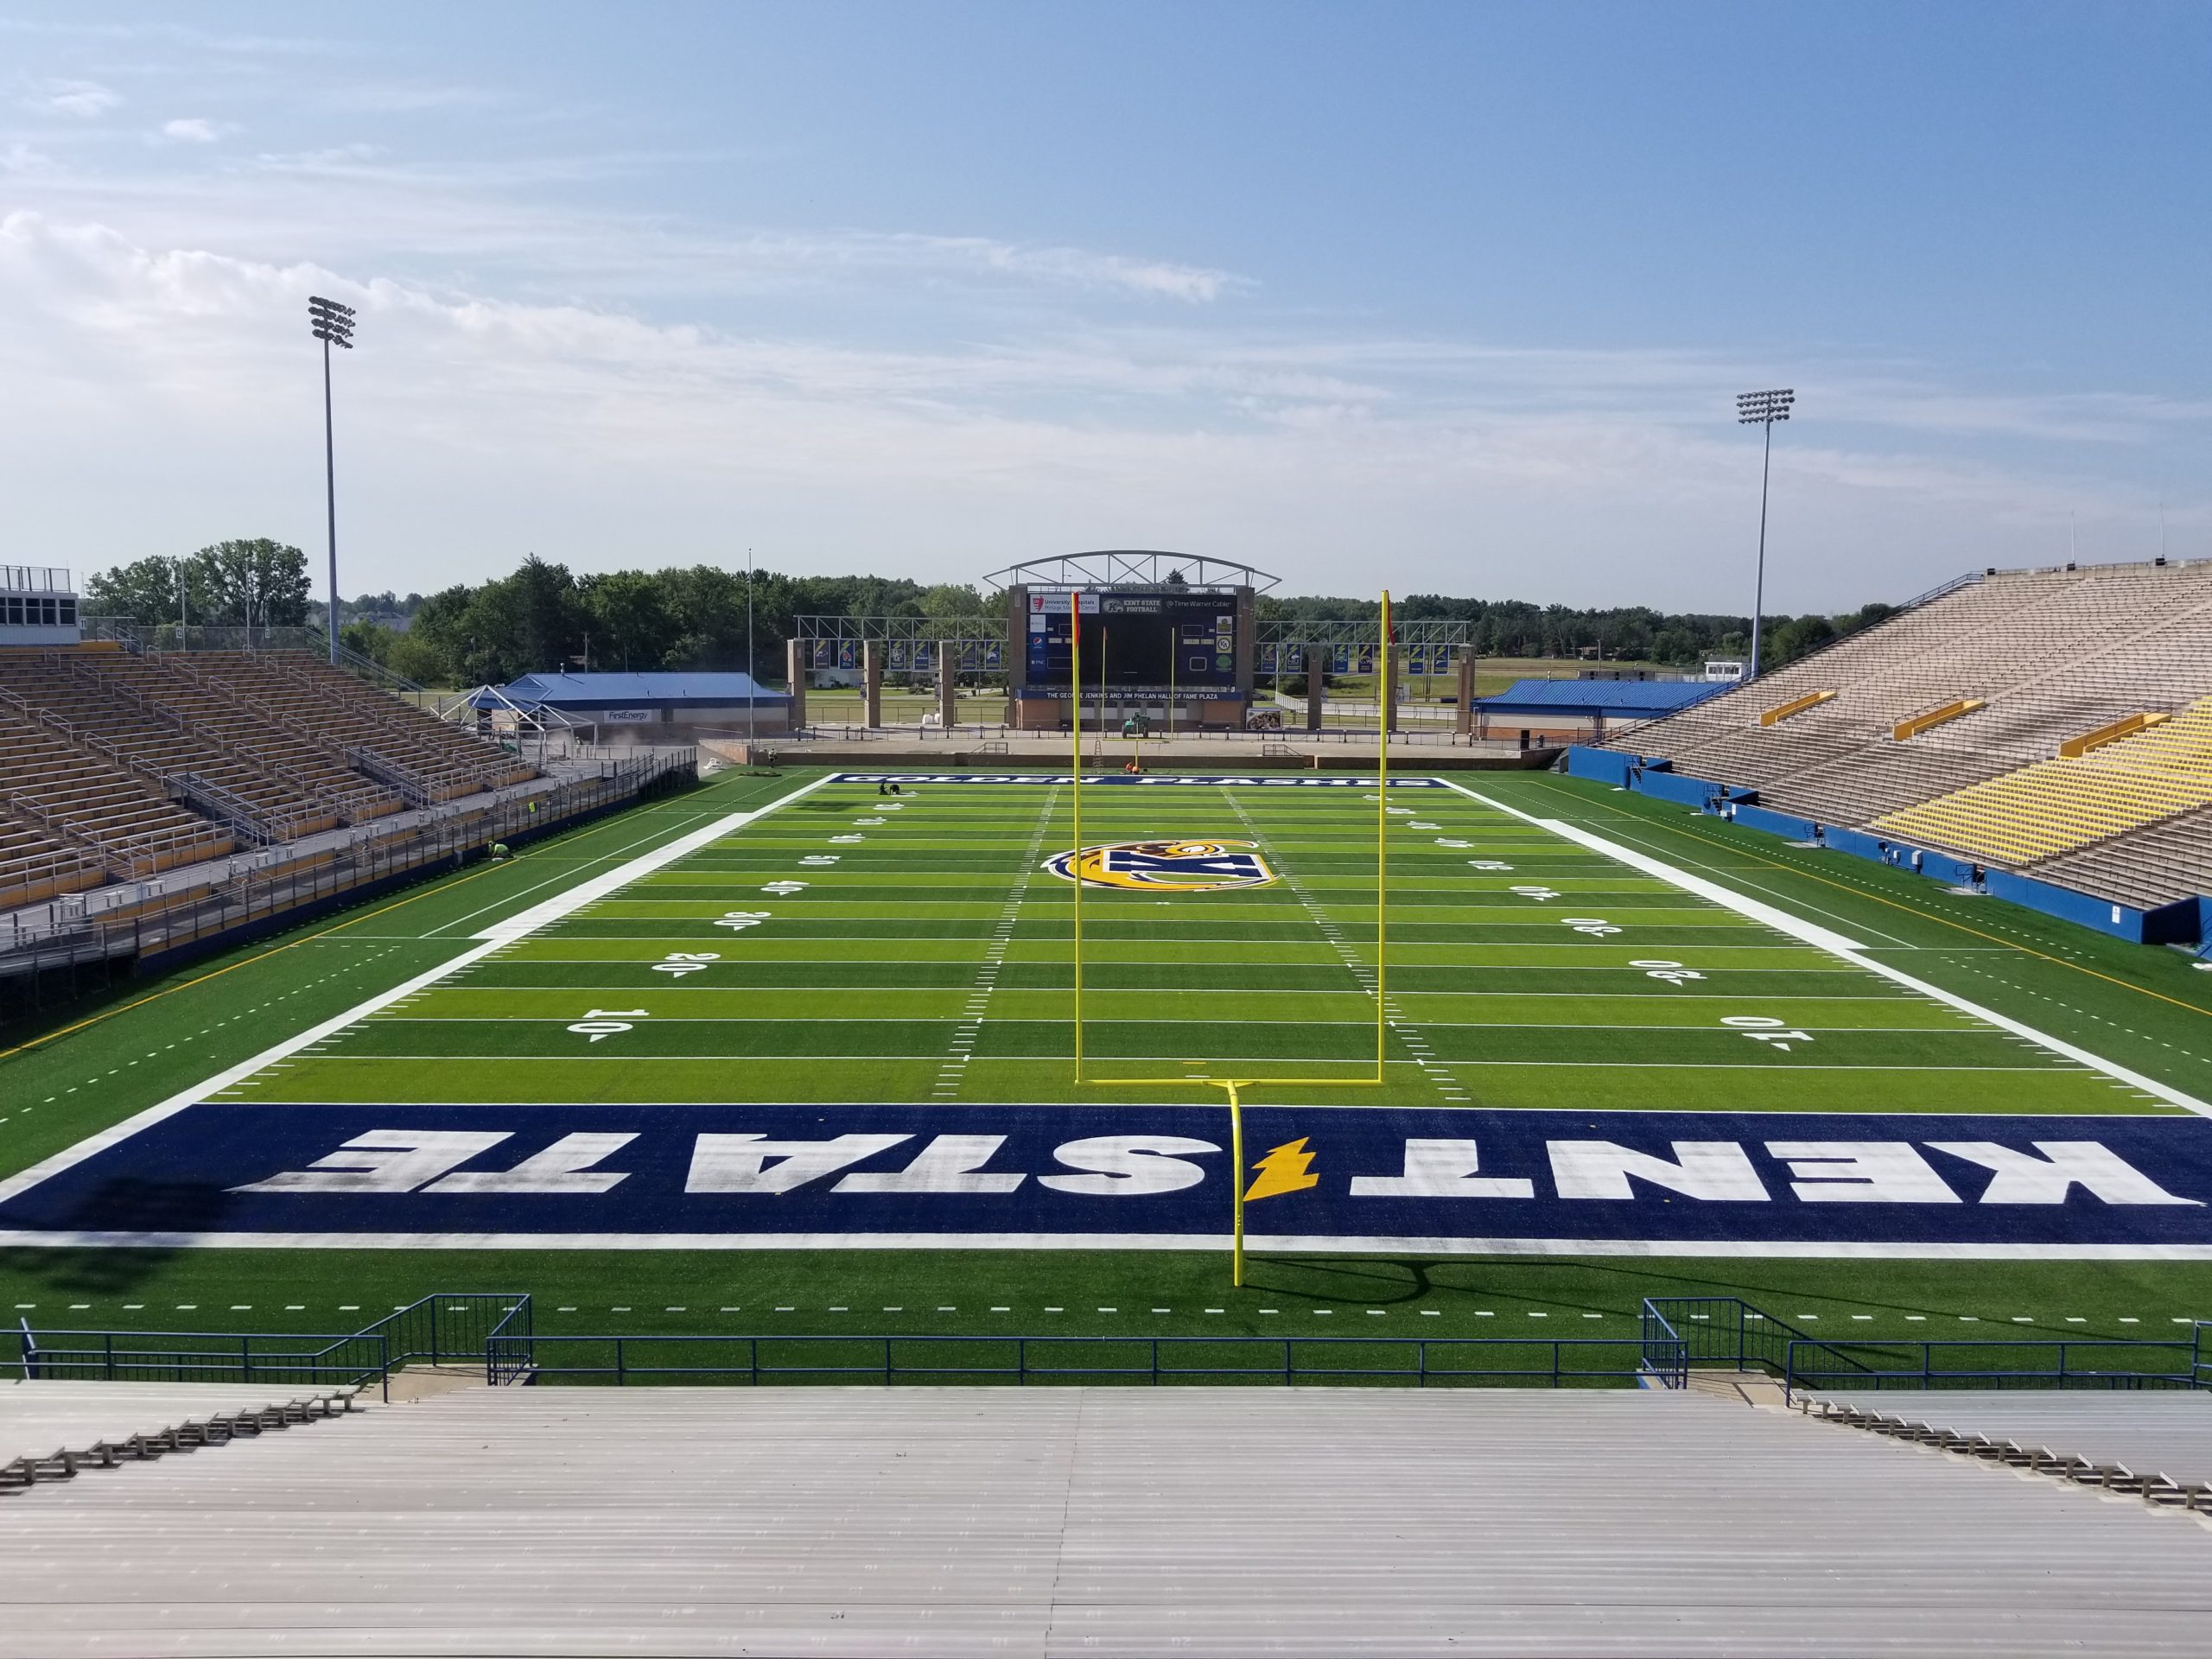 Kent State Doubles Up with AstroTurf AstroTurf